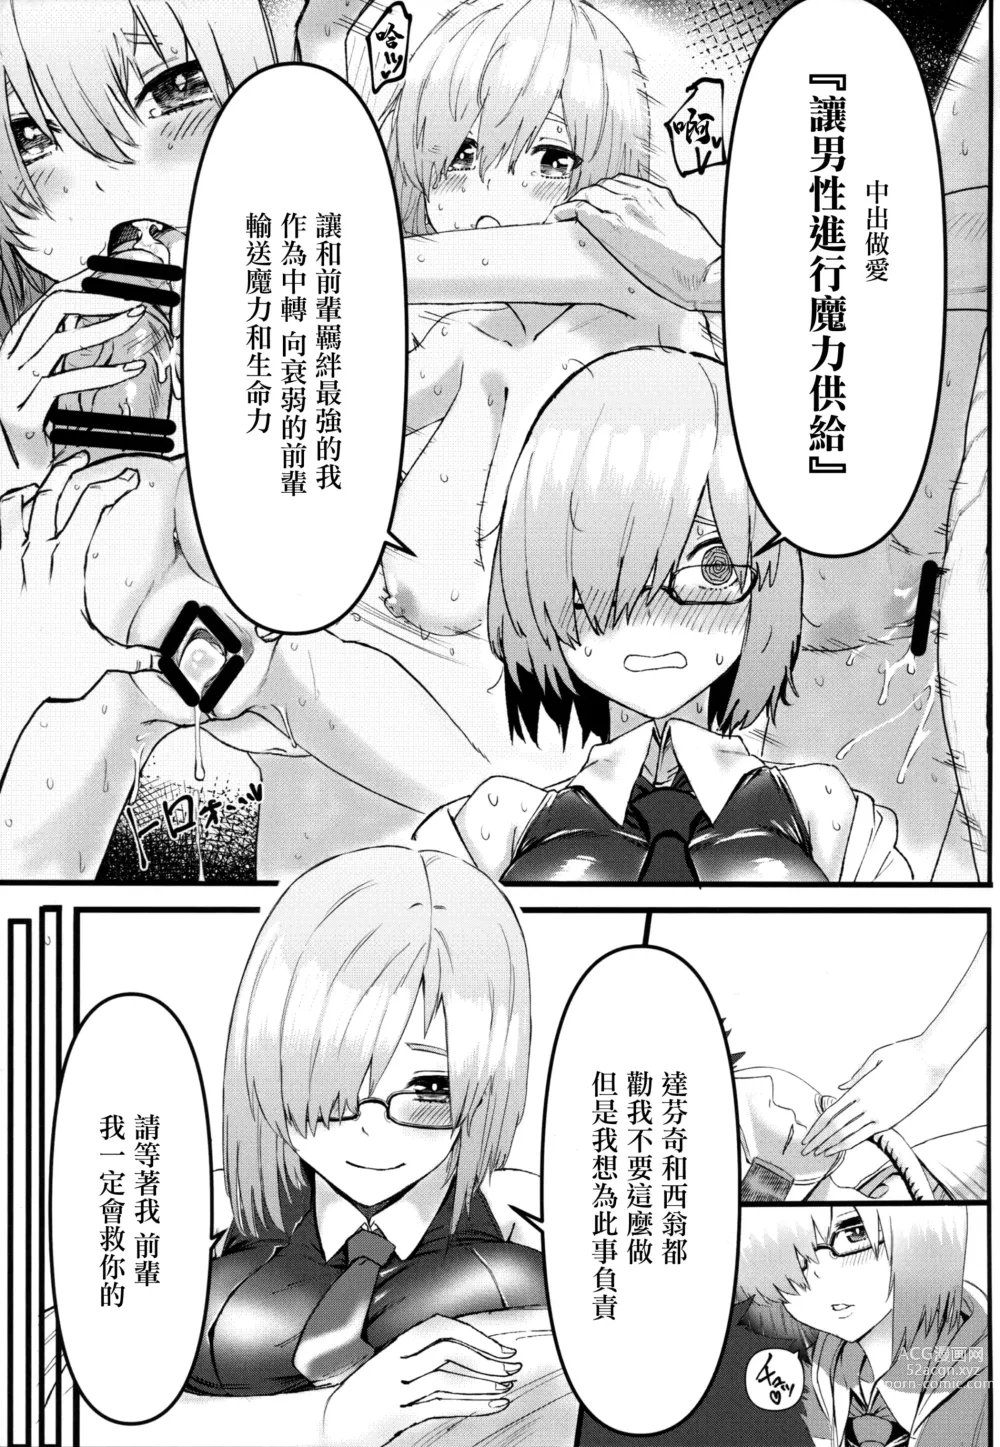 Page 6 of doujinshi 為了前輩NTR瑪修!